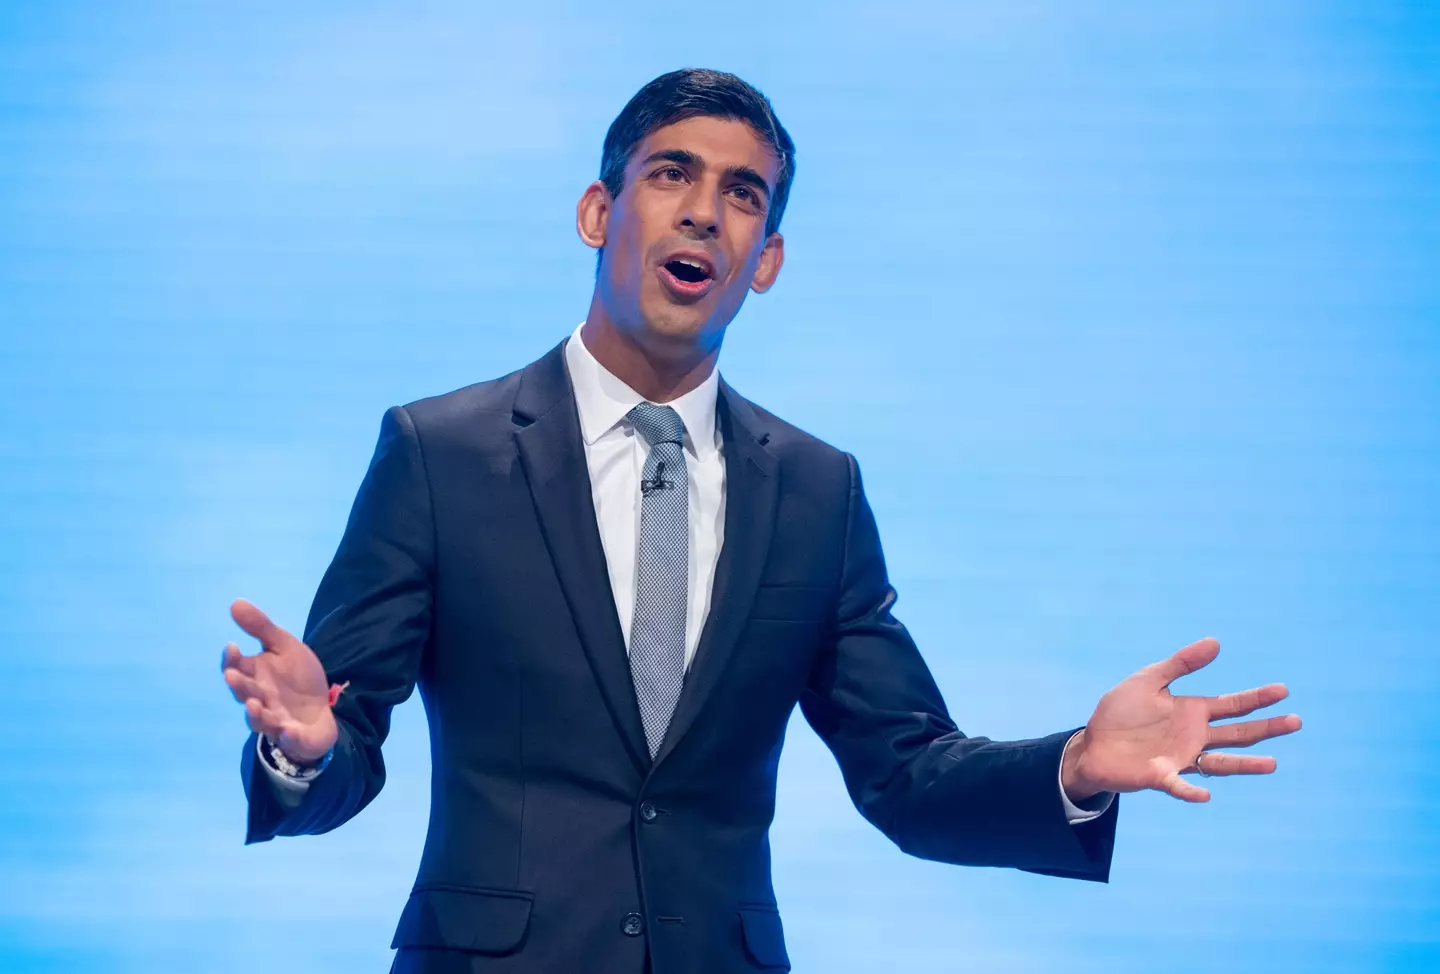 Rishi Sunak has become prime minister after winning the Tory leadership contest.